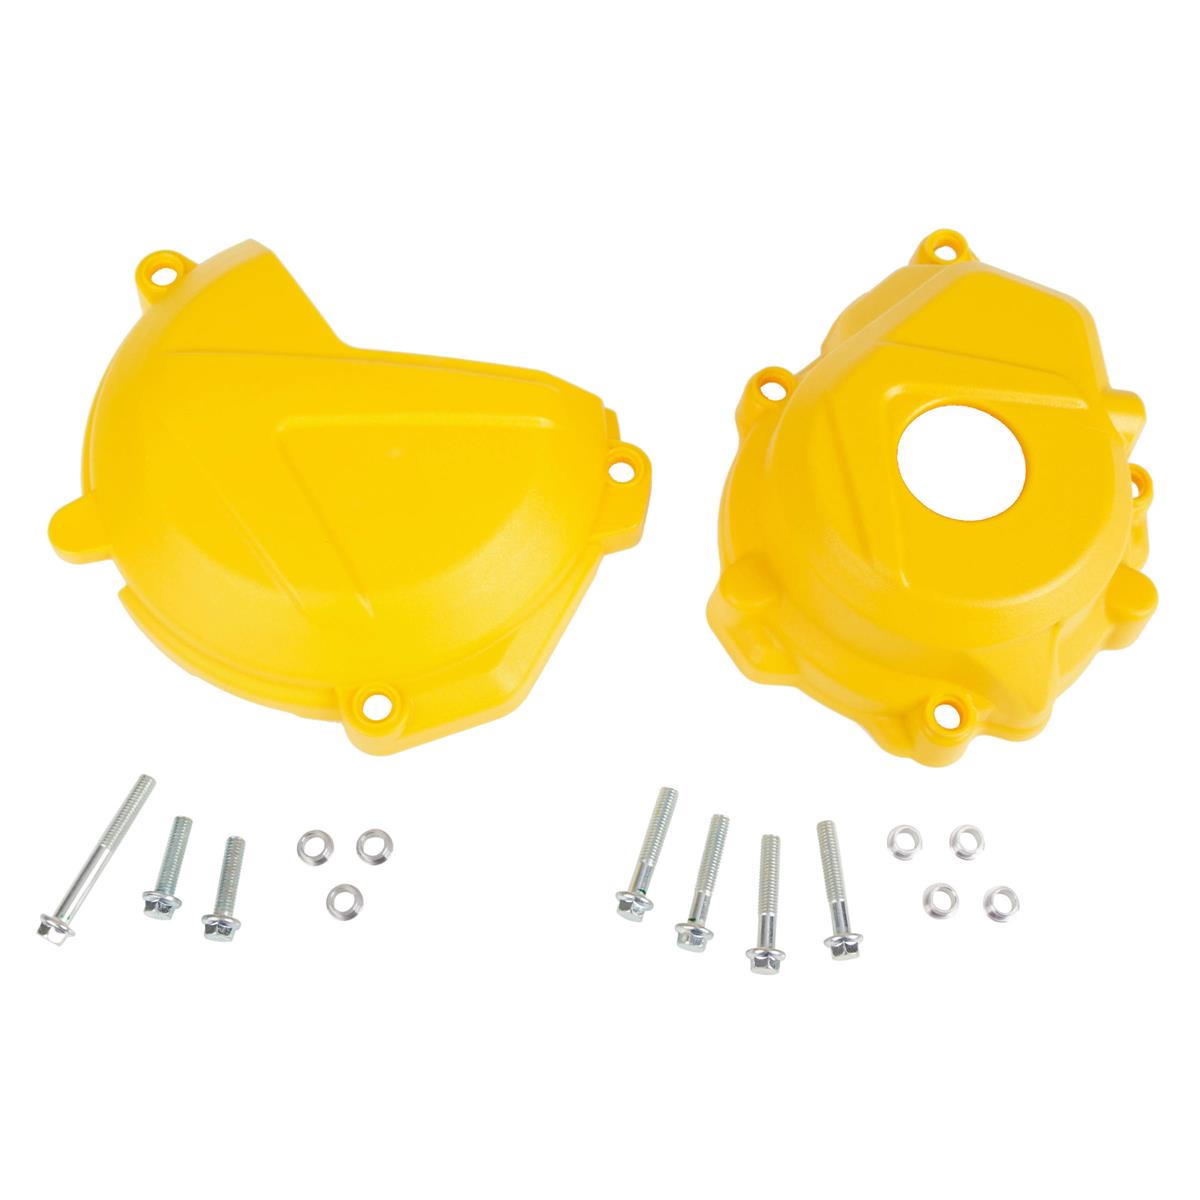 Polisport Clutch/Ignition Cover Protection  KTM SX-F 250/350 13-20, Yellow